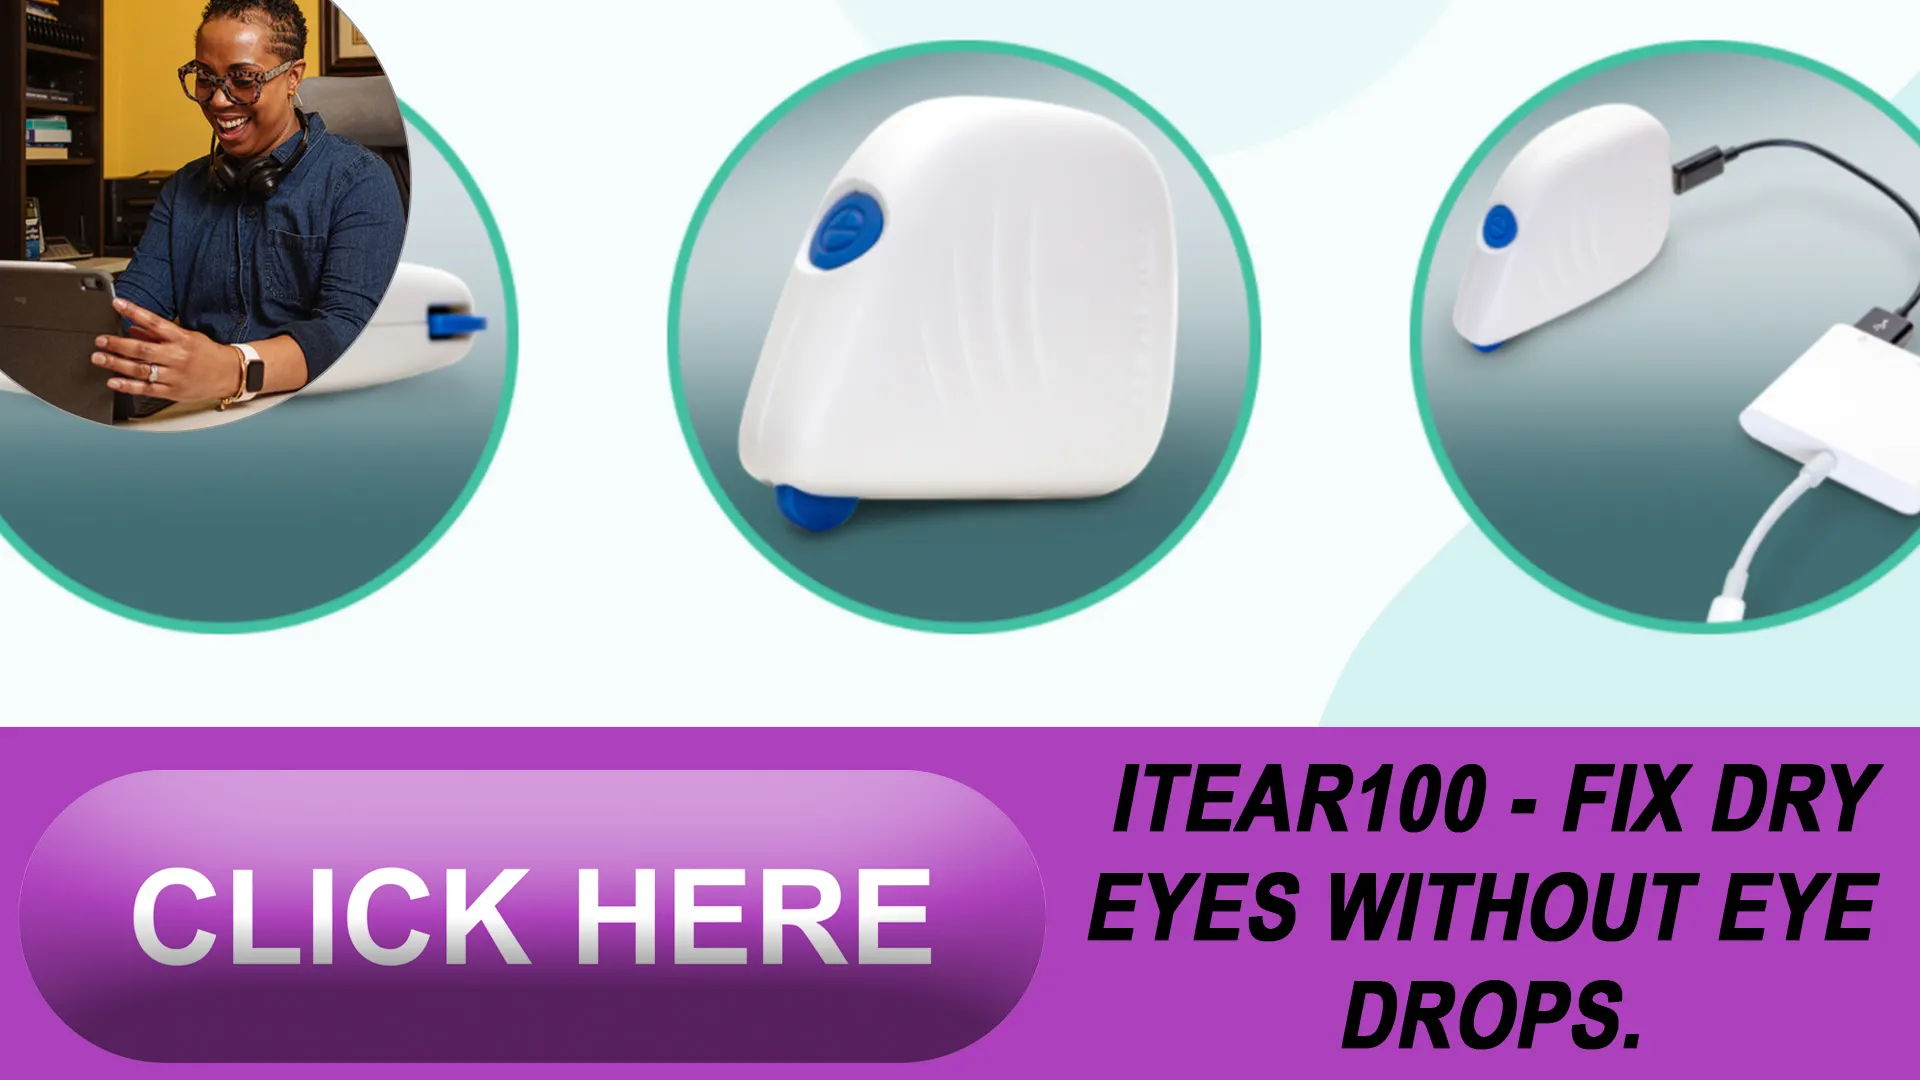 Gaining Access to iTEAR100 and Expert Support